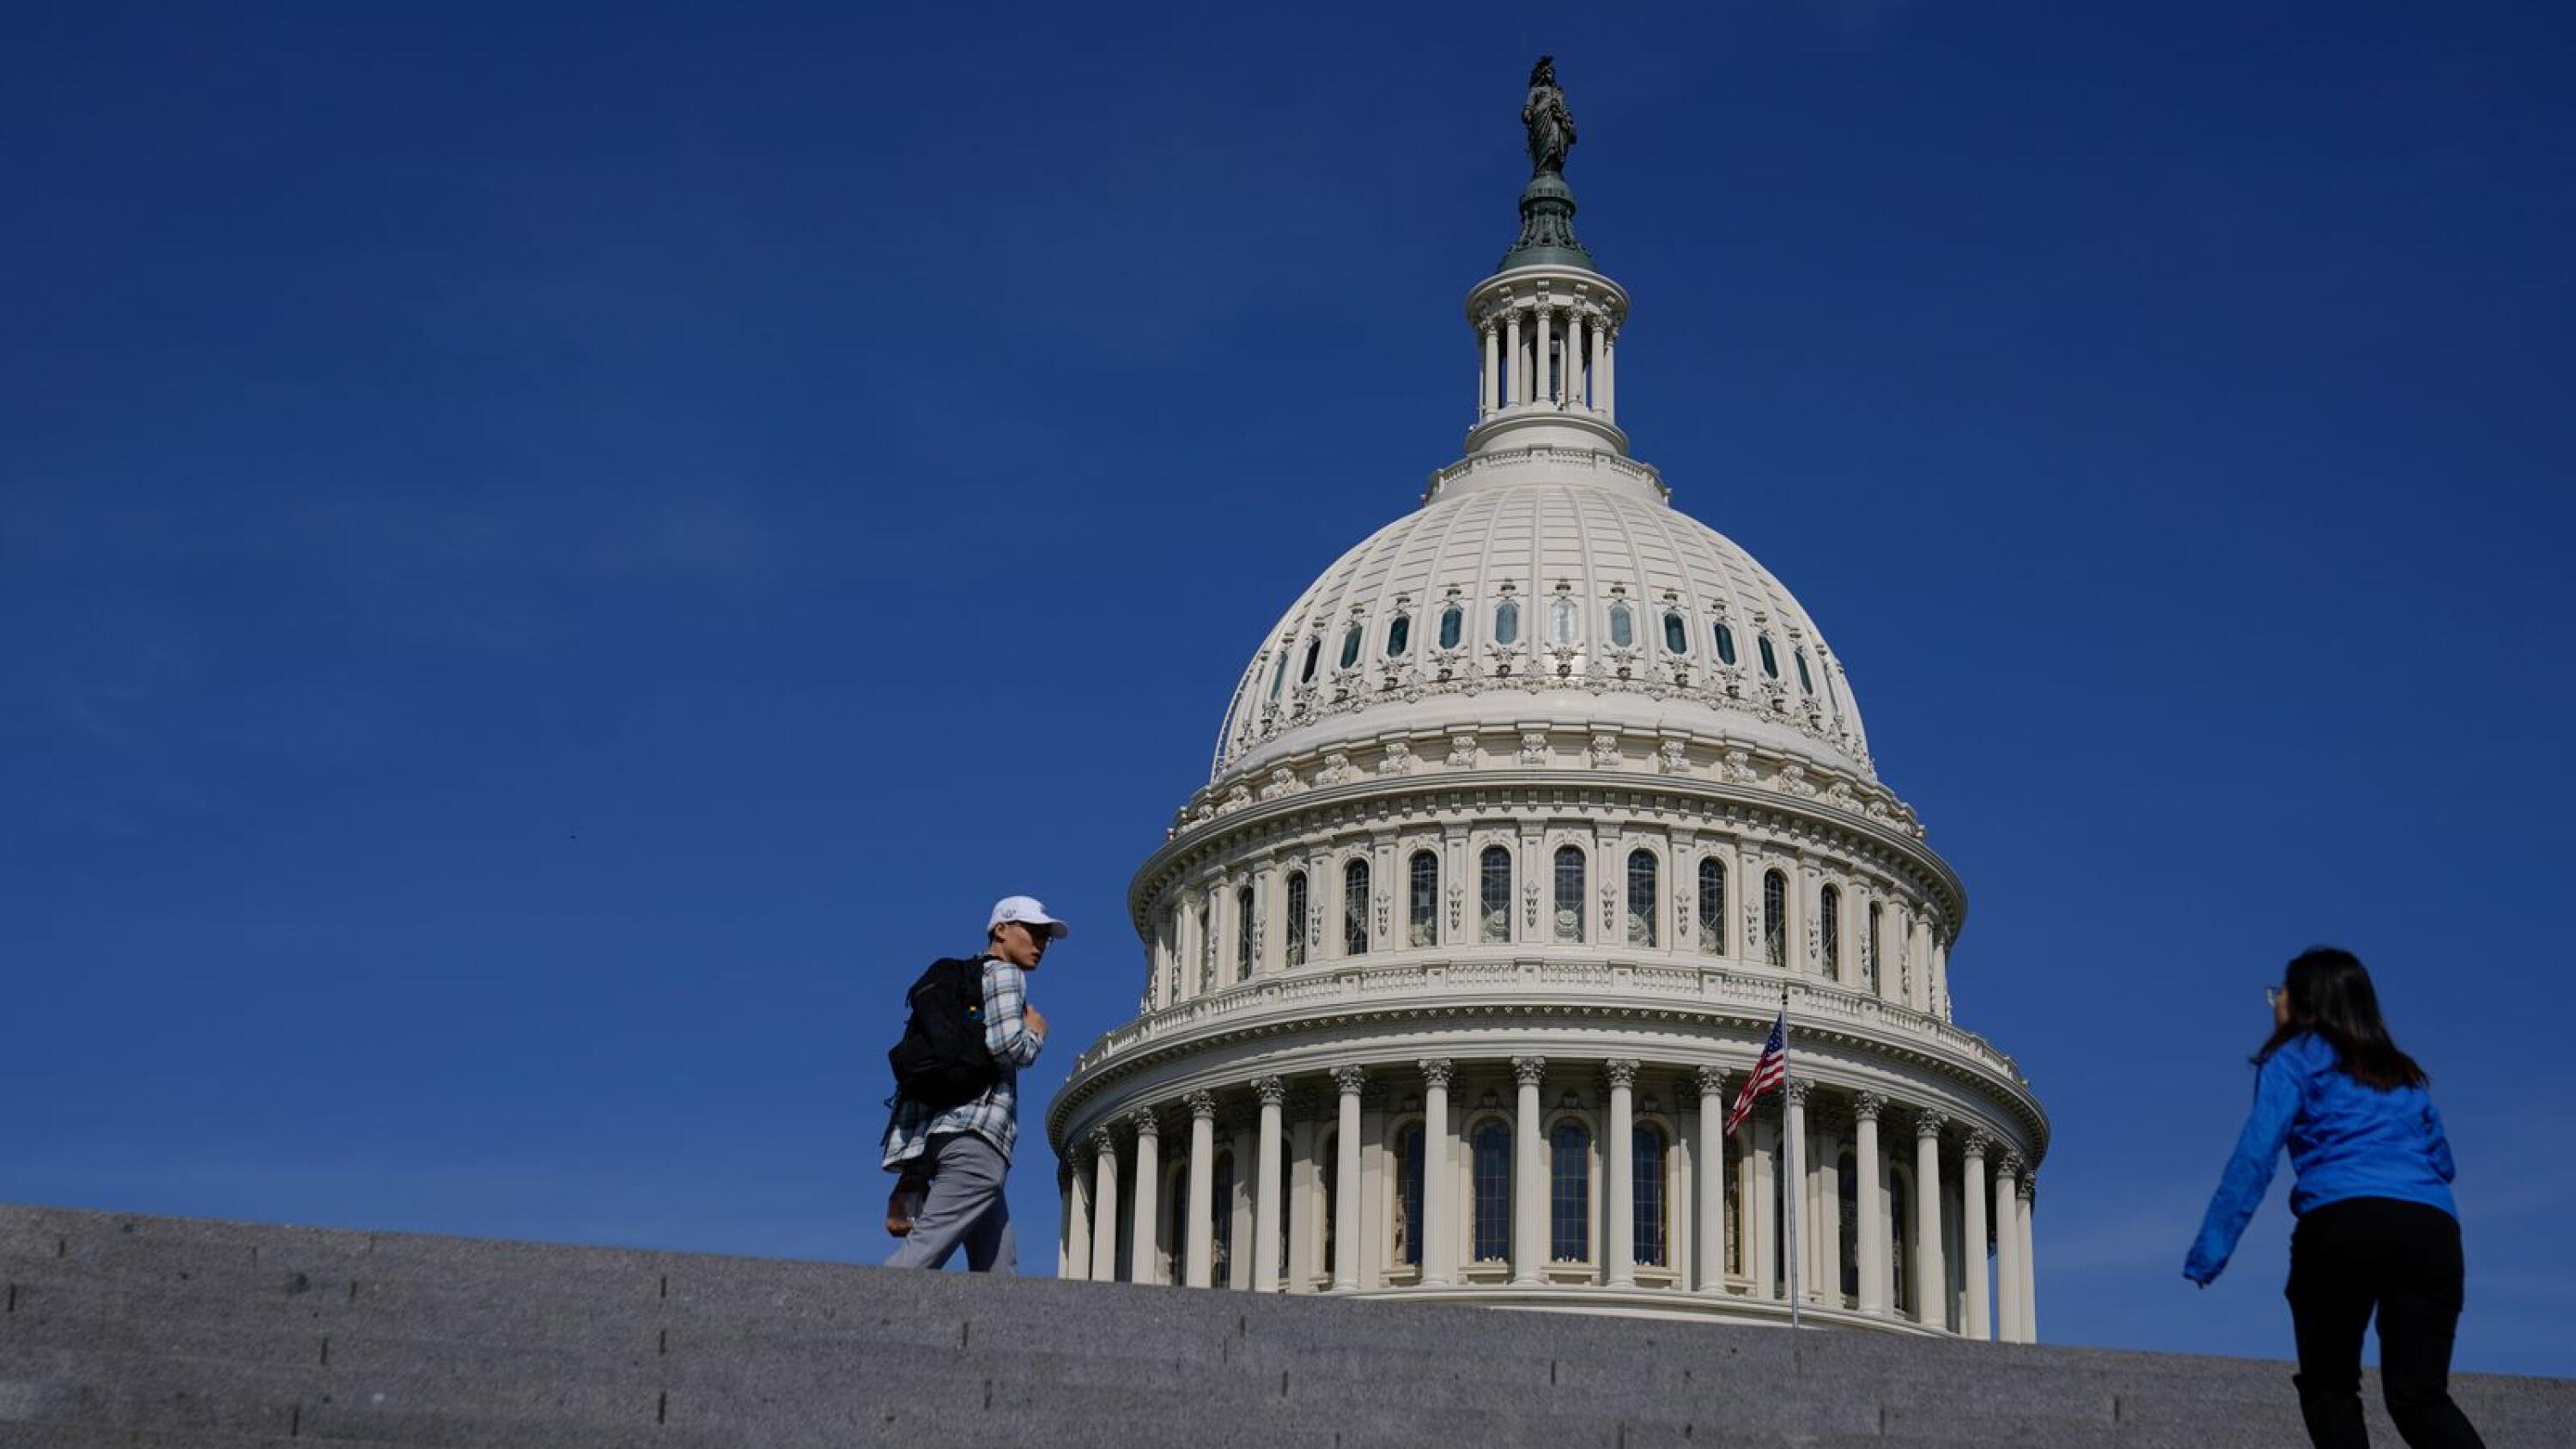 Debt ceiling deal: What's in, what's out of the bill to avert U.S. default